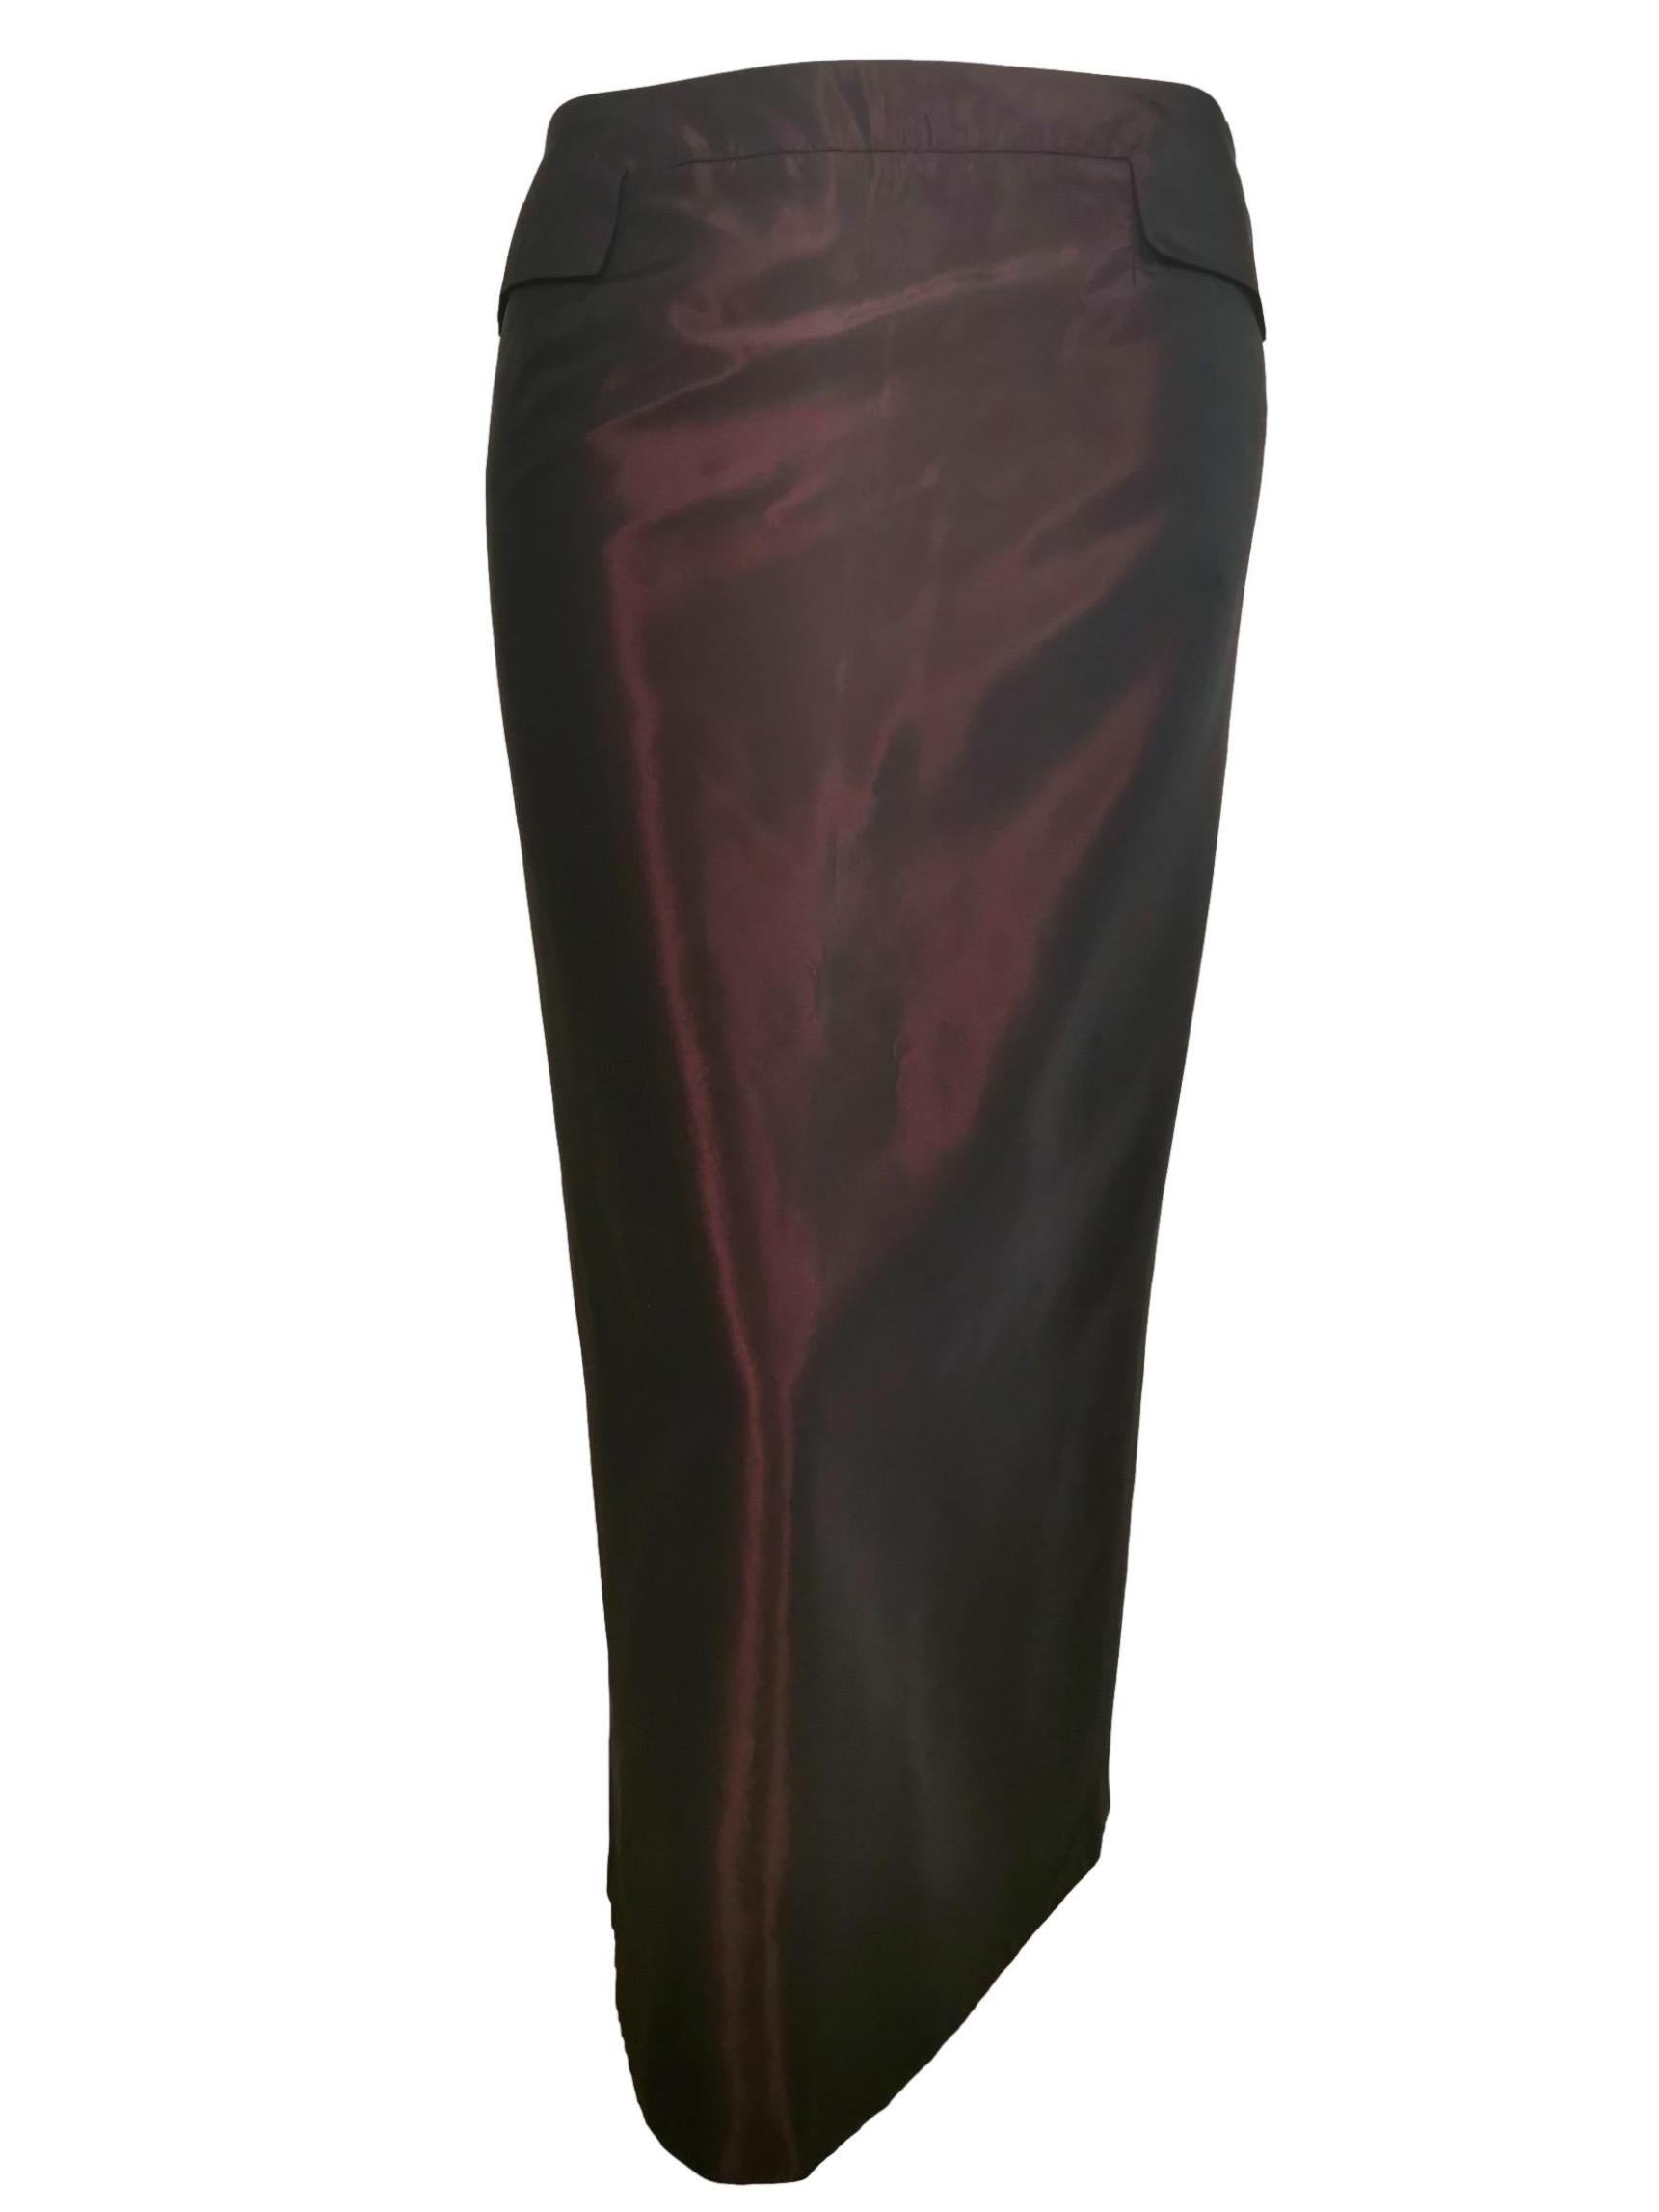 Alexander McQueen Two Tone Kick Pleat Fitted Skirt 1996 For Sale 9